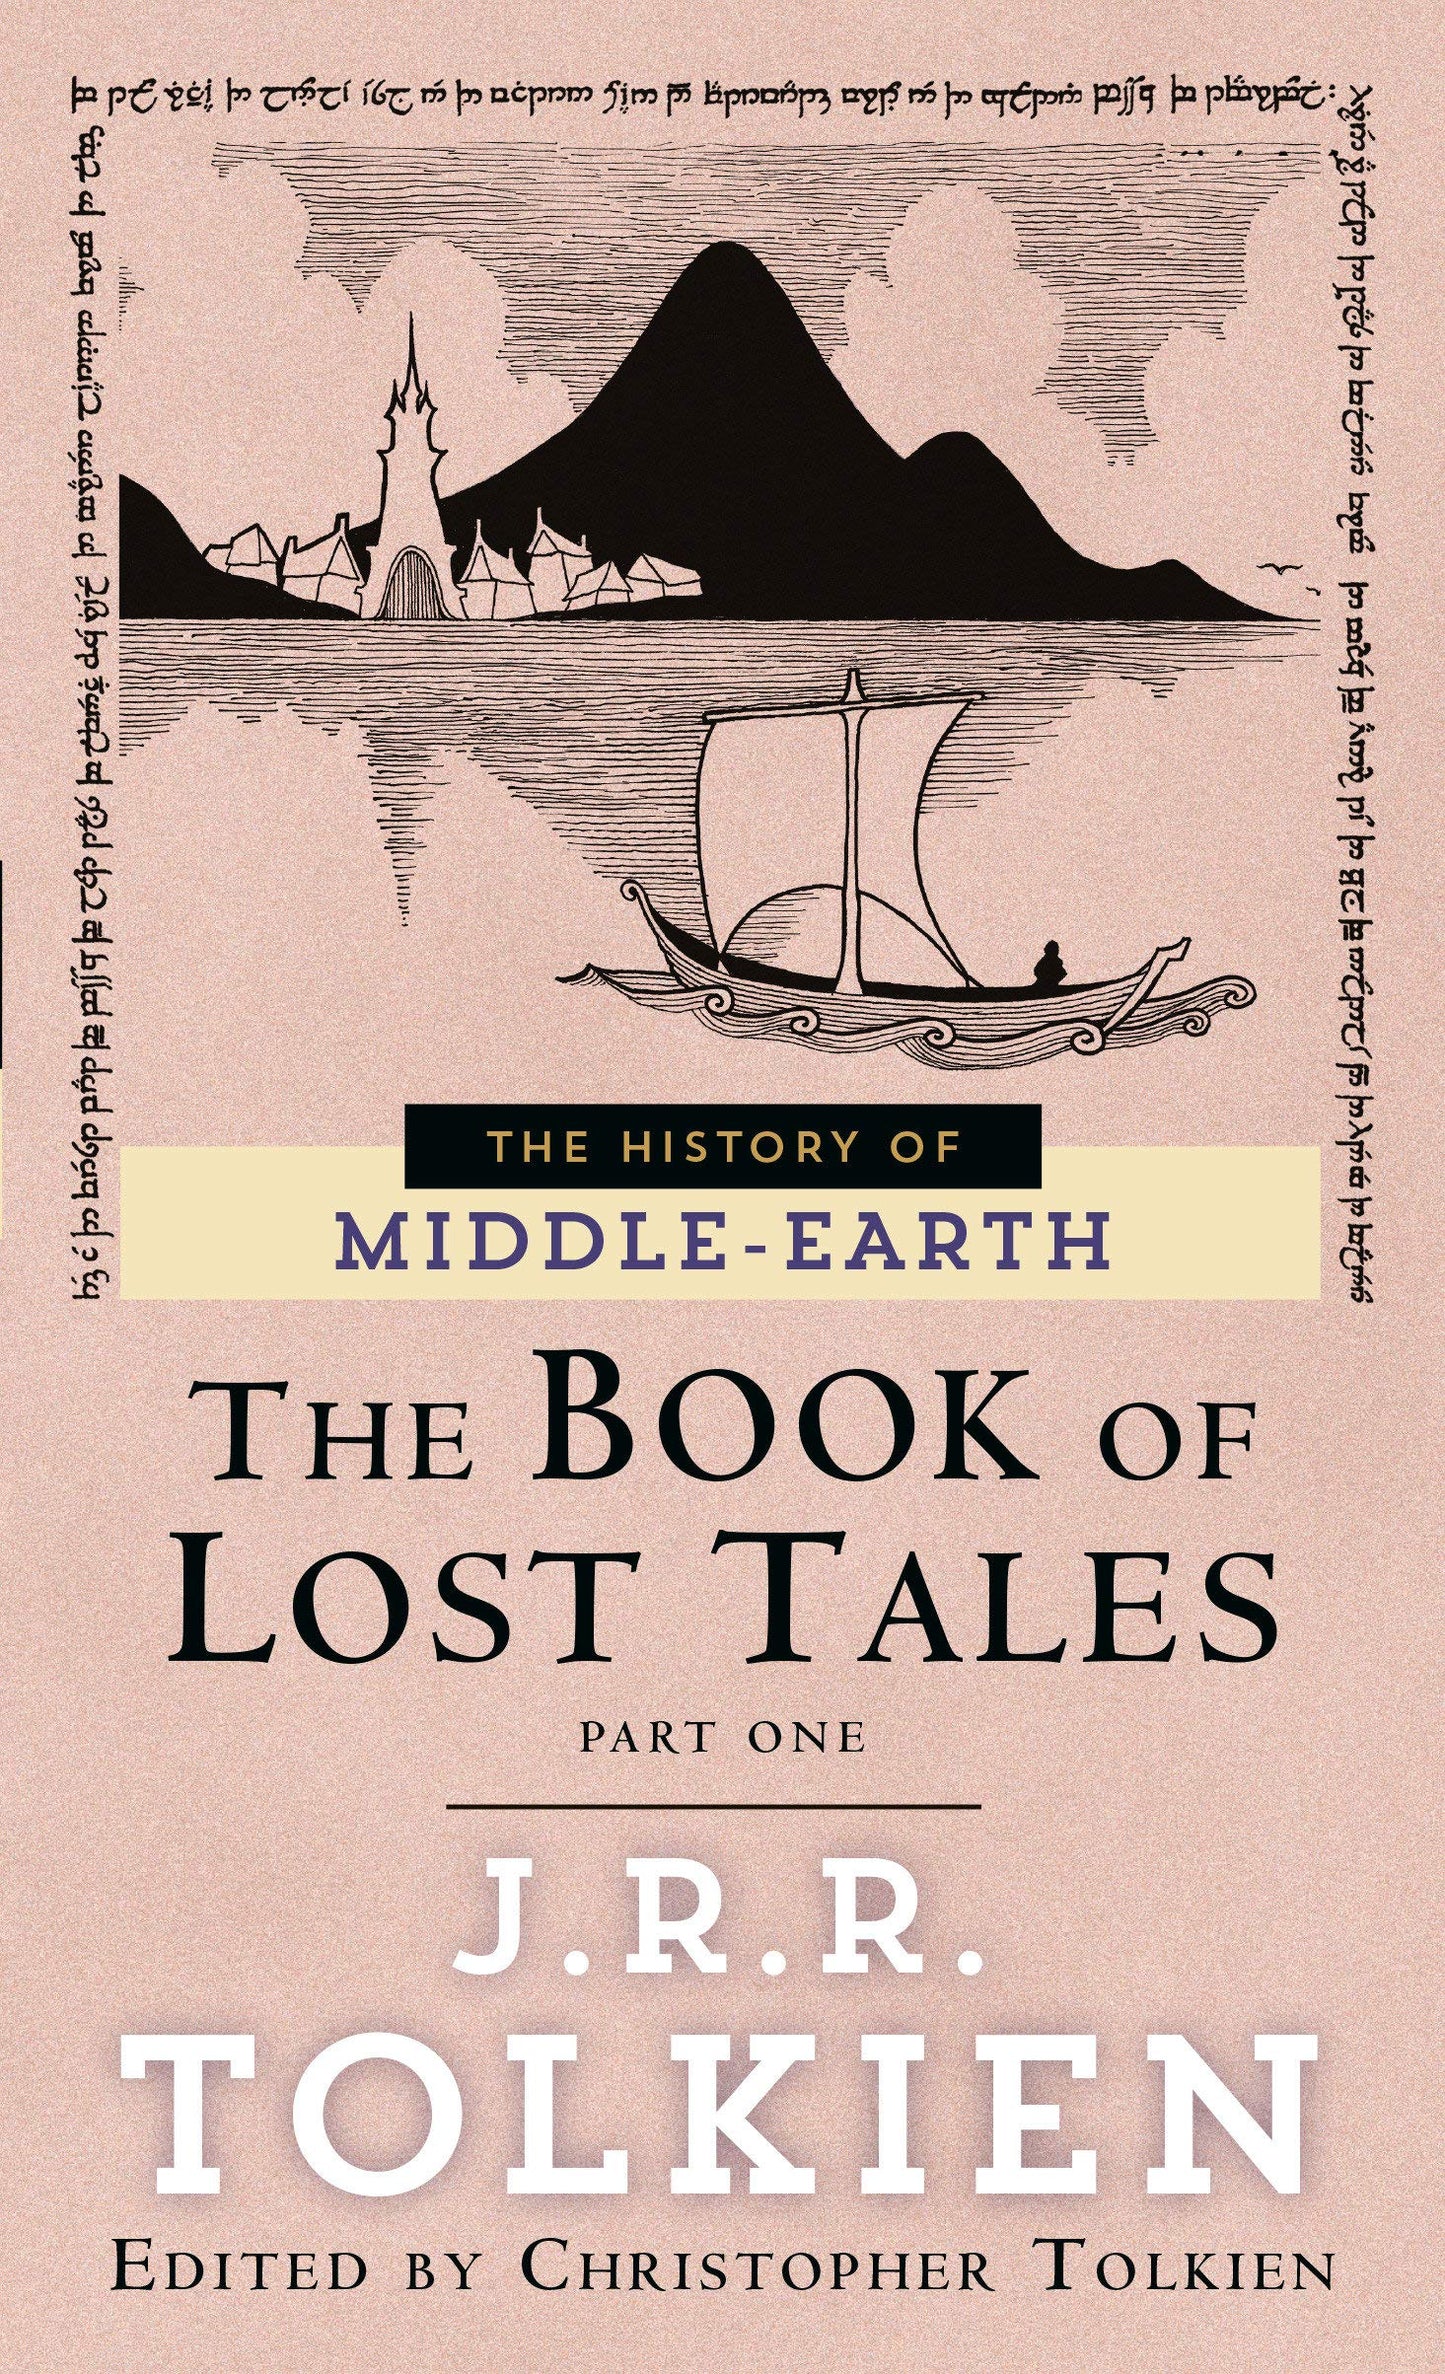 Book of Lost Tales: Part 1